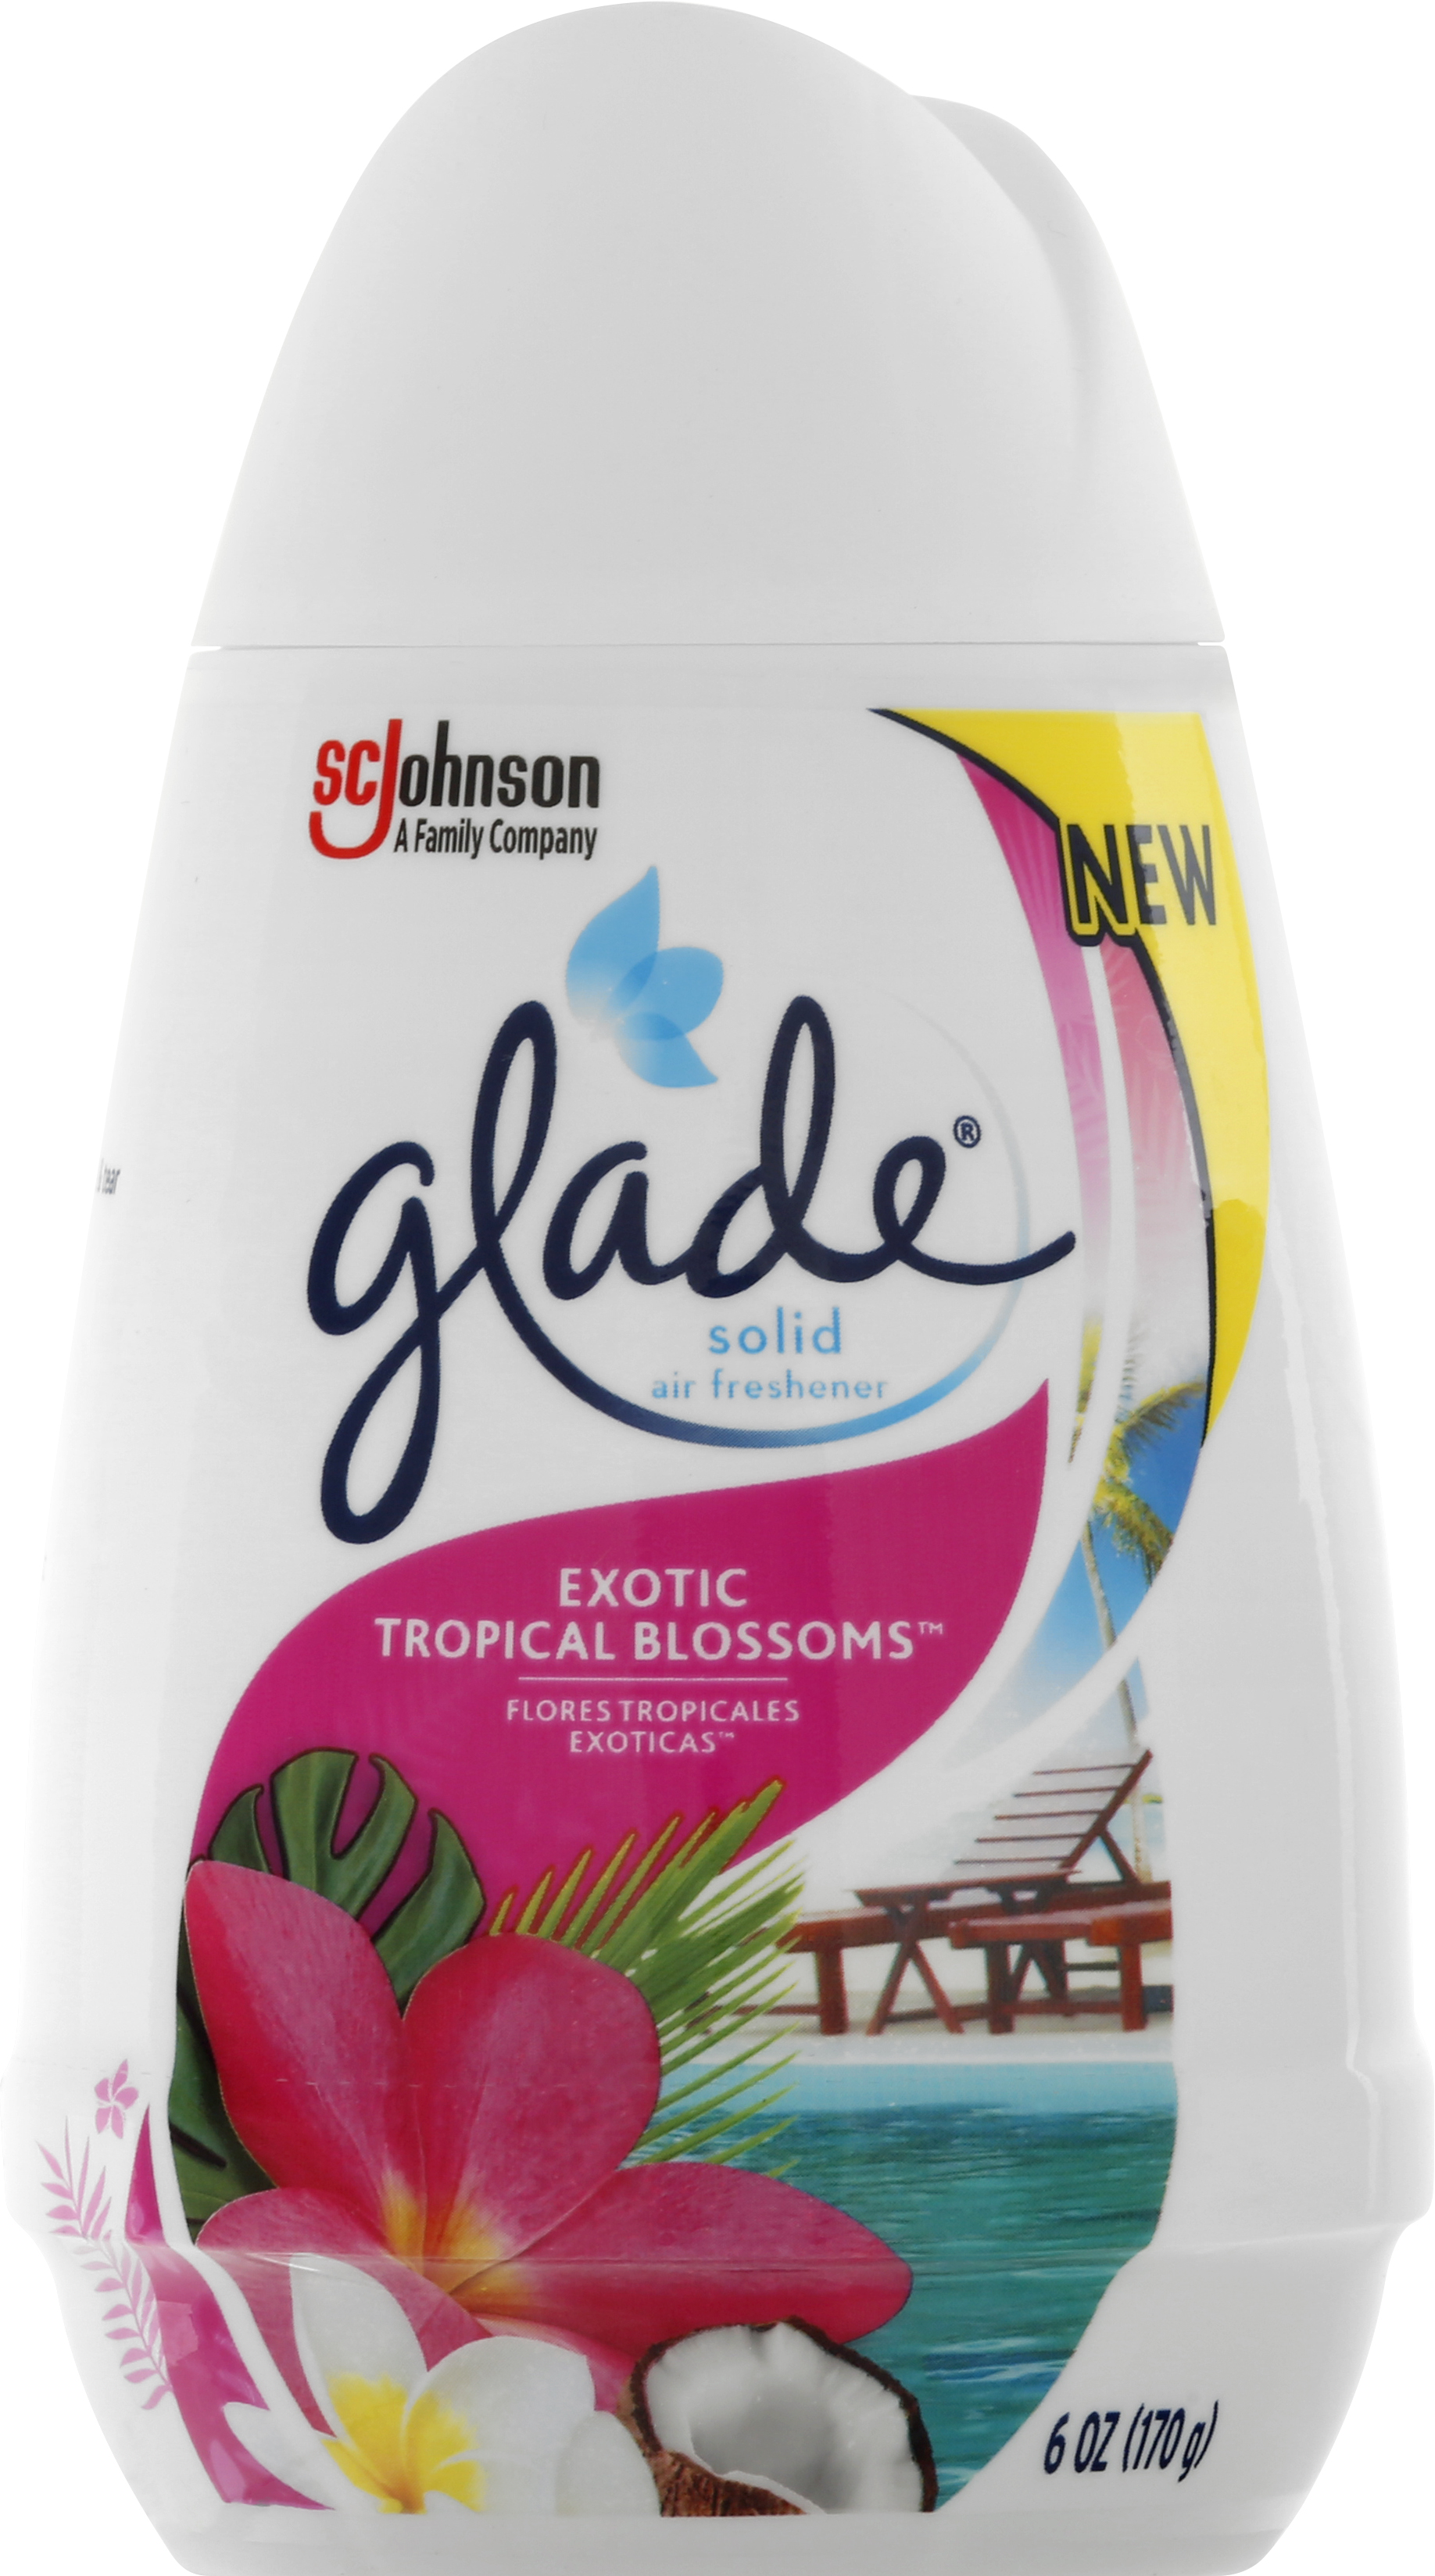 Glade Solid Exotic Tropical Blossoms Air Freshener 6 oz